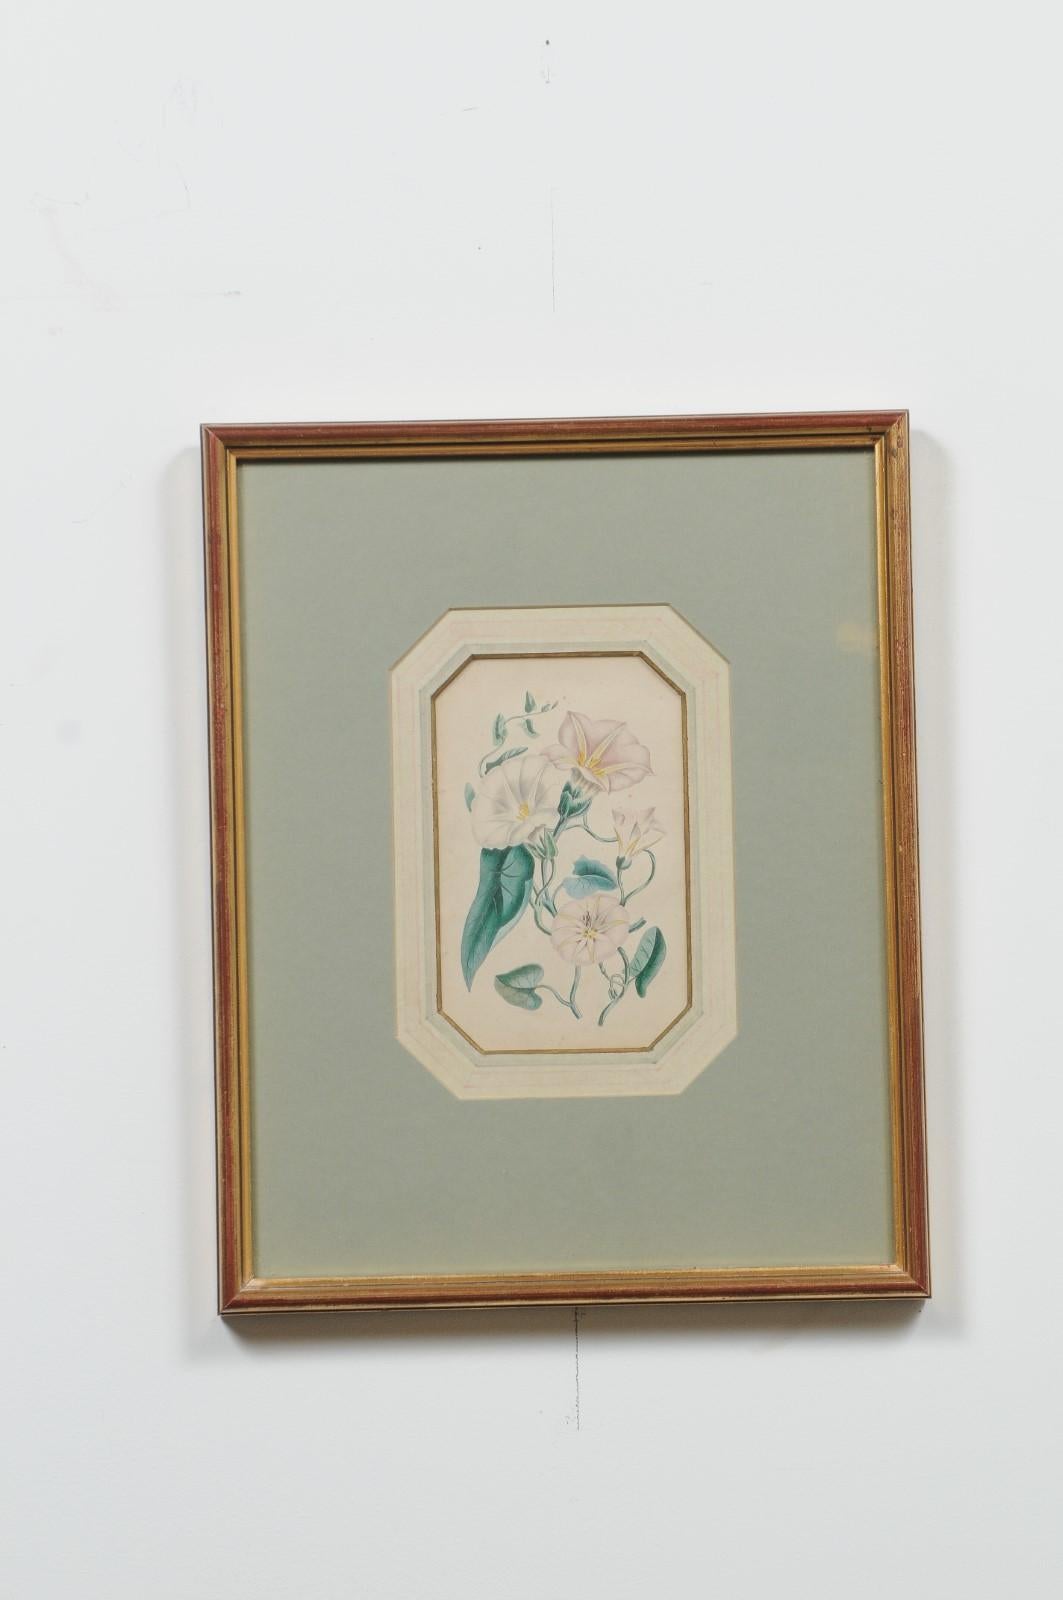 Four English 20th Century Botanical Prints with Yellow, Blue and White Flowers 1